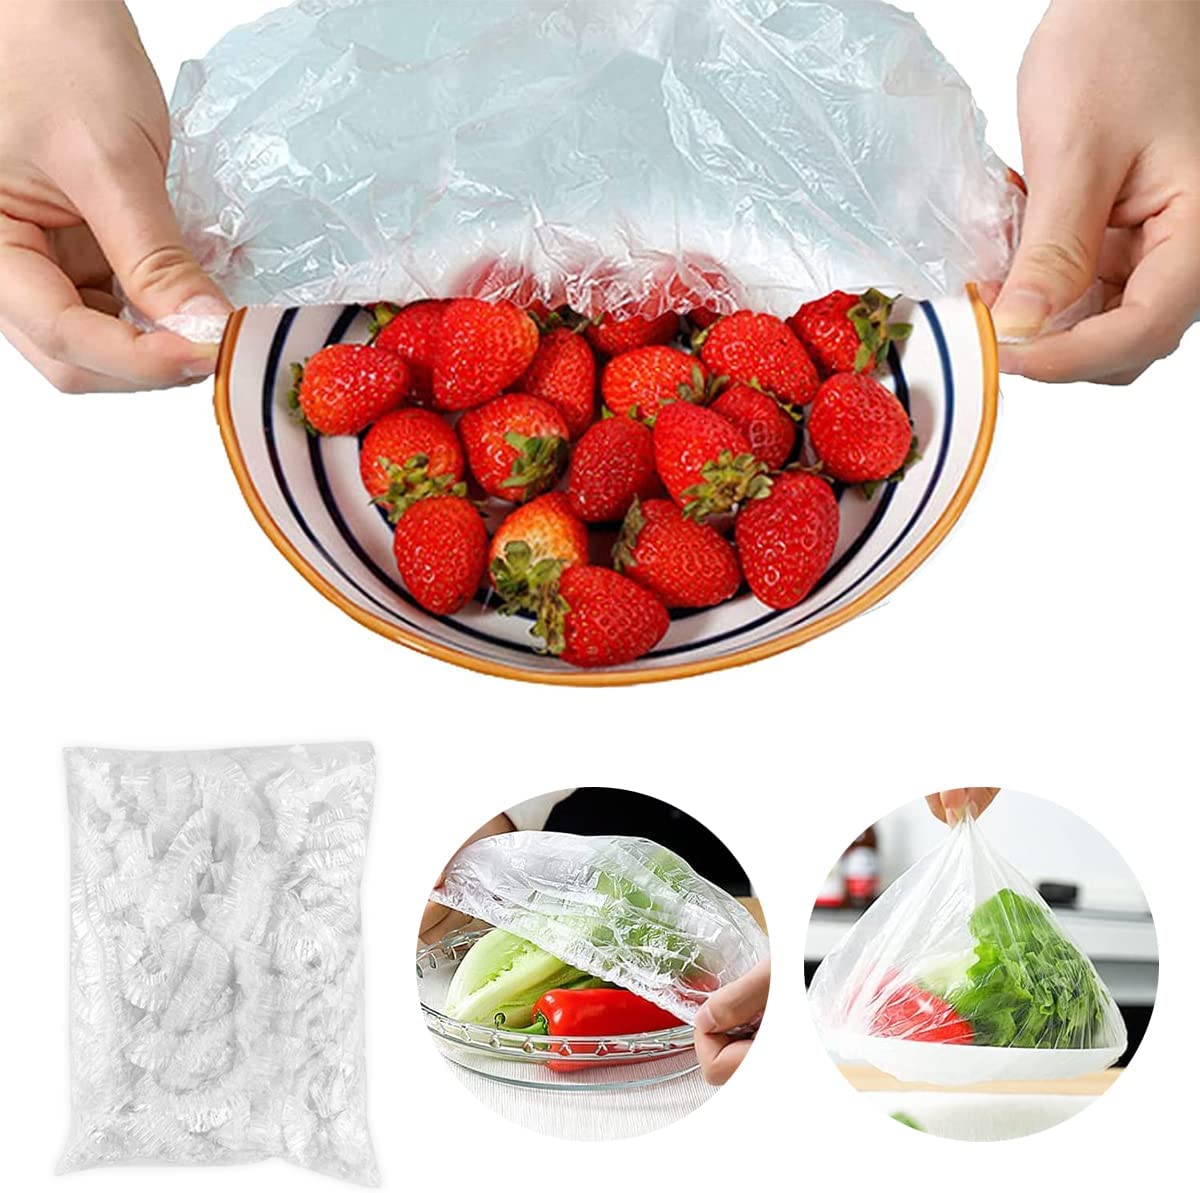 Disposable Elastic Food Storage Covers| Kitchen Wrap Seal Caps (200 Pieces)